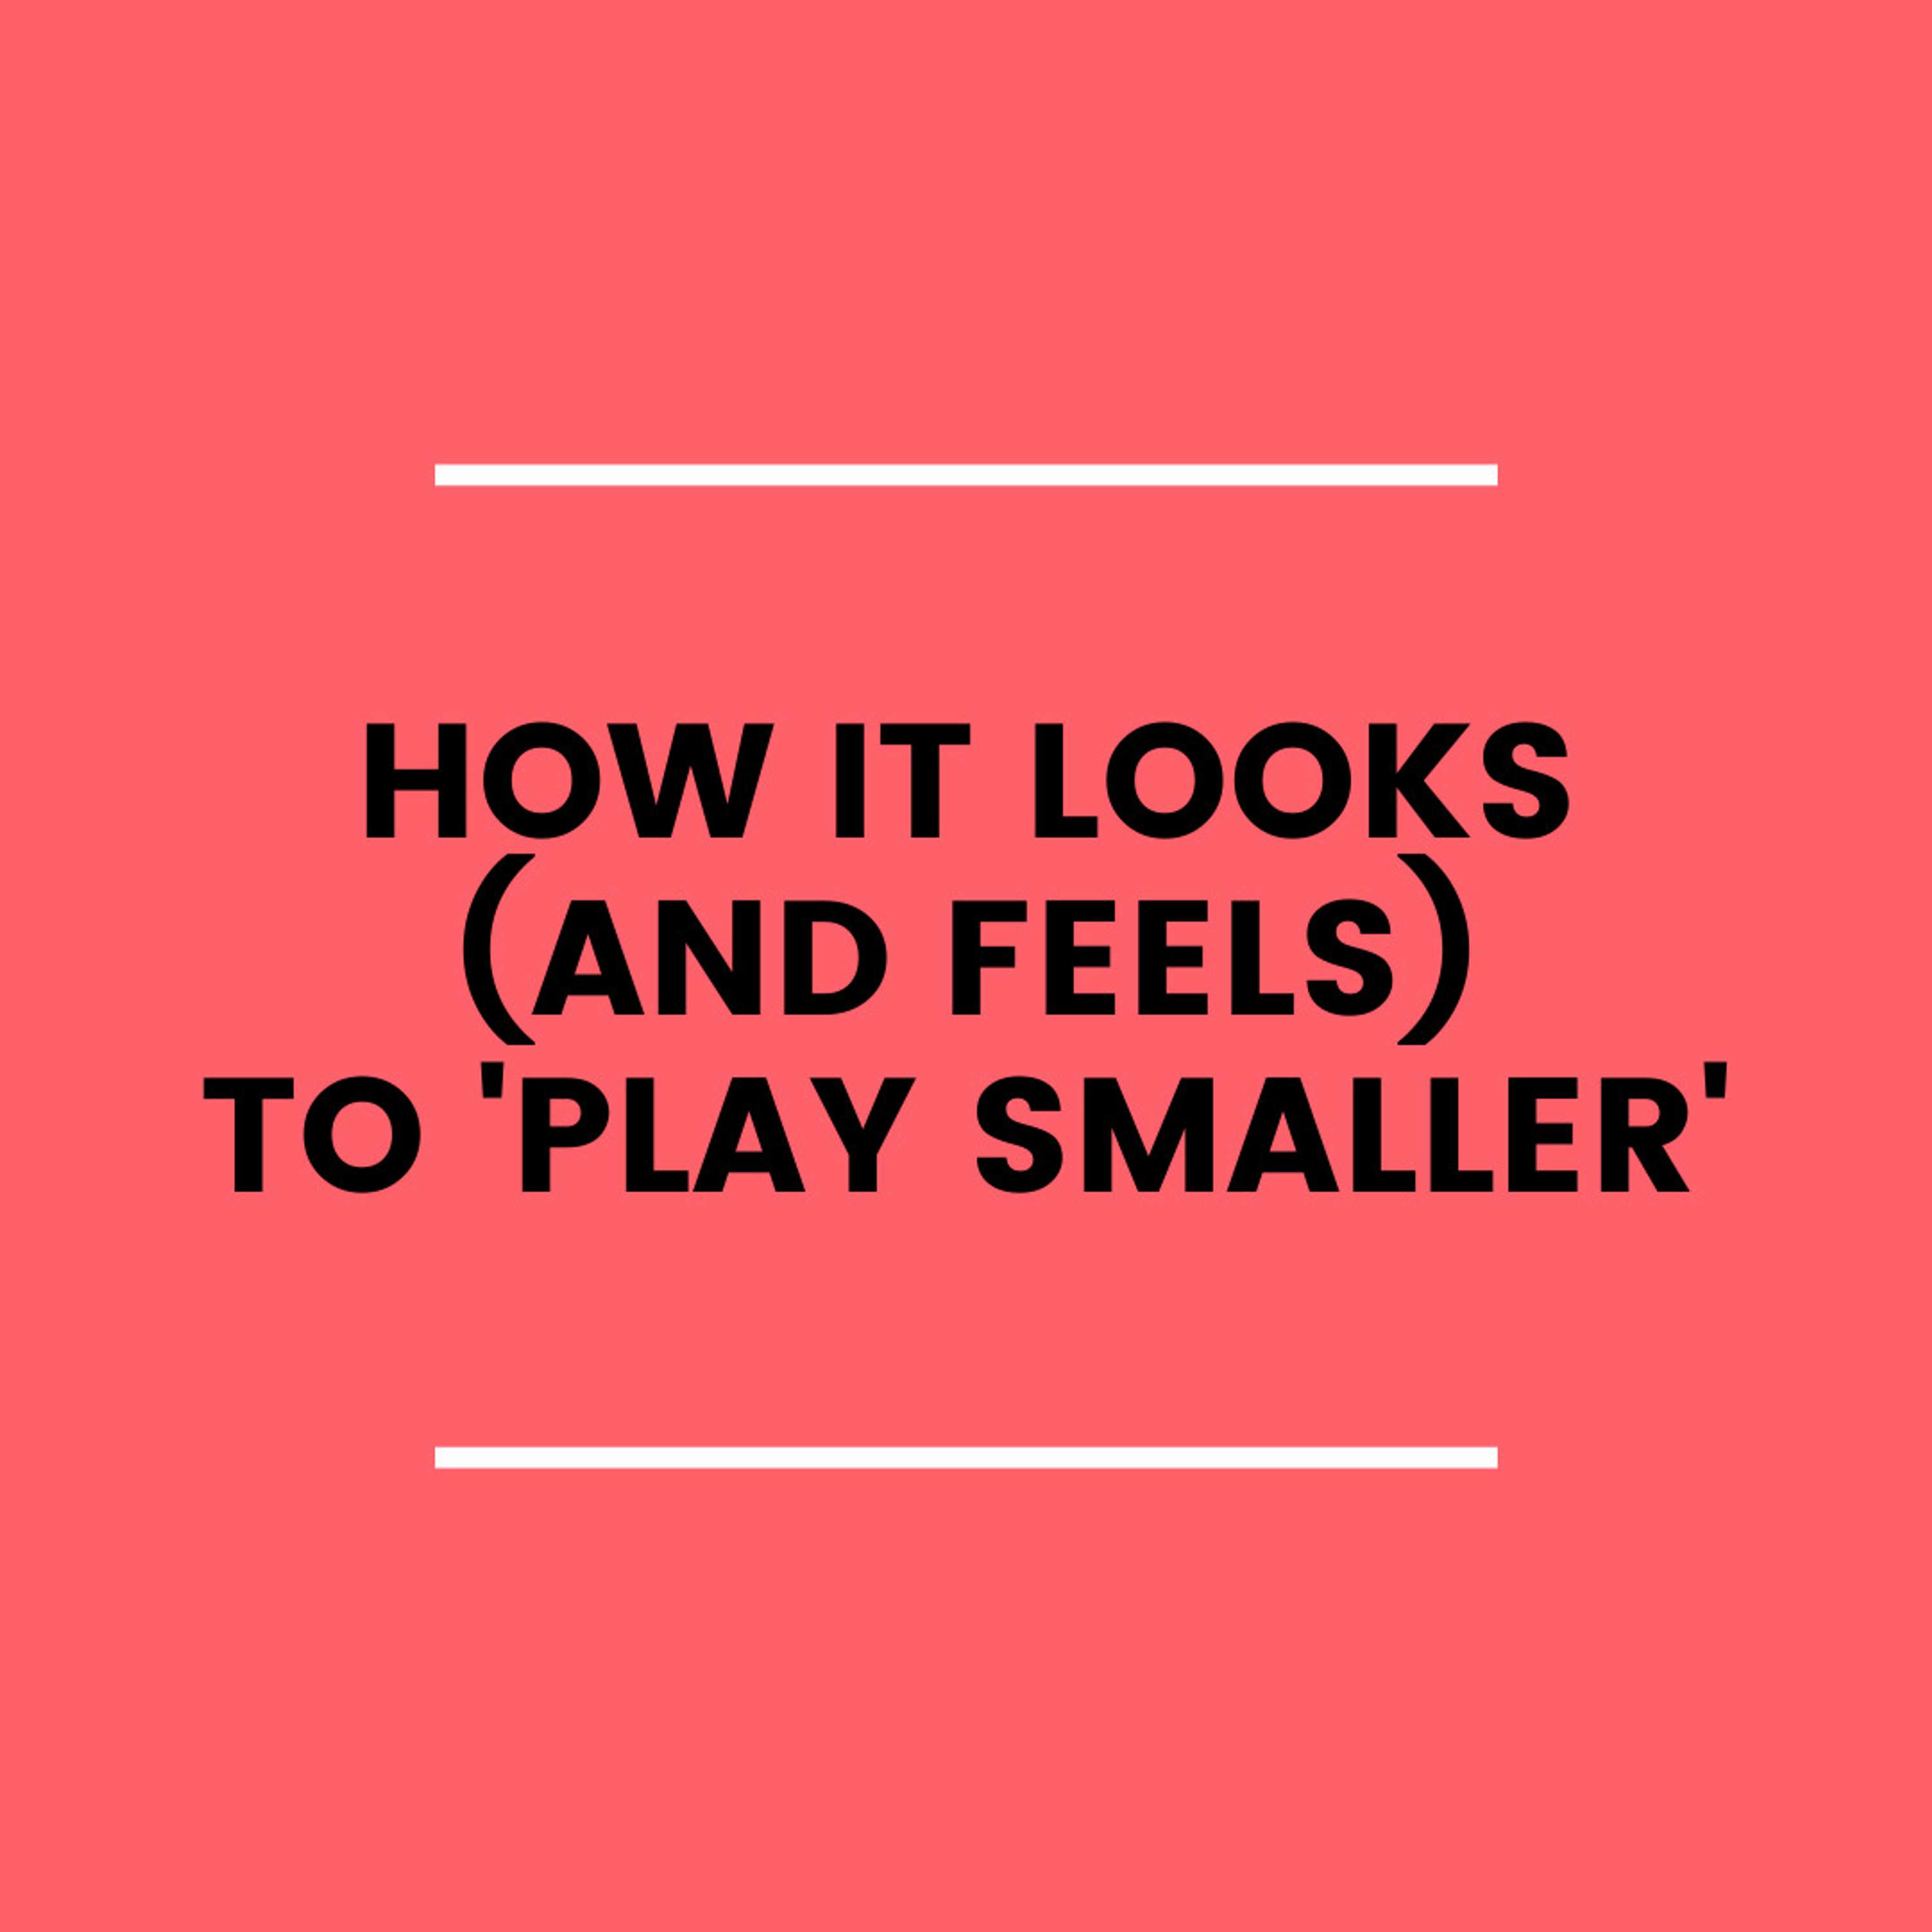 19. How it Looks (and Feels) to 'Play Smaller'